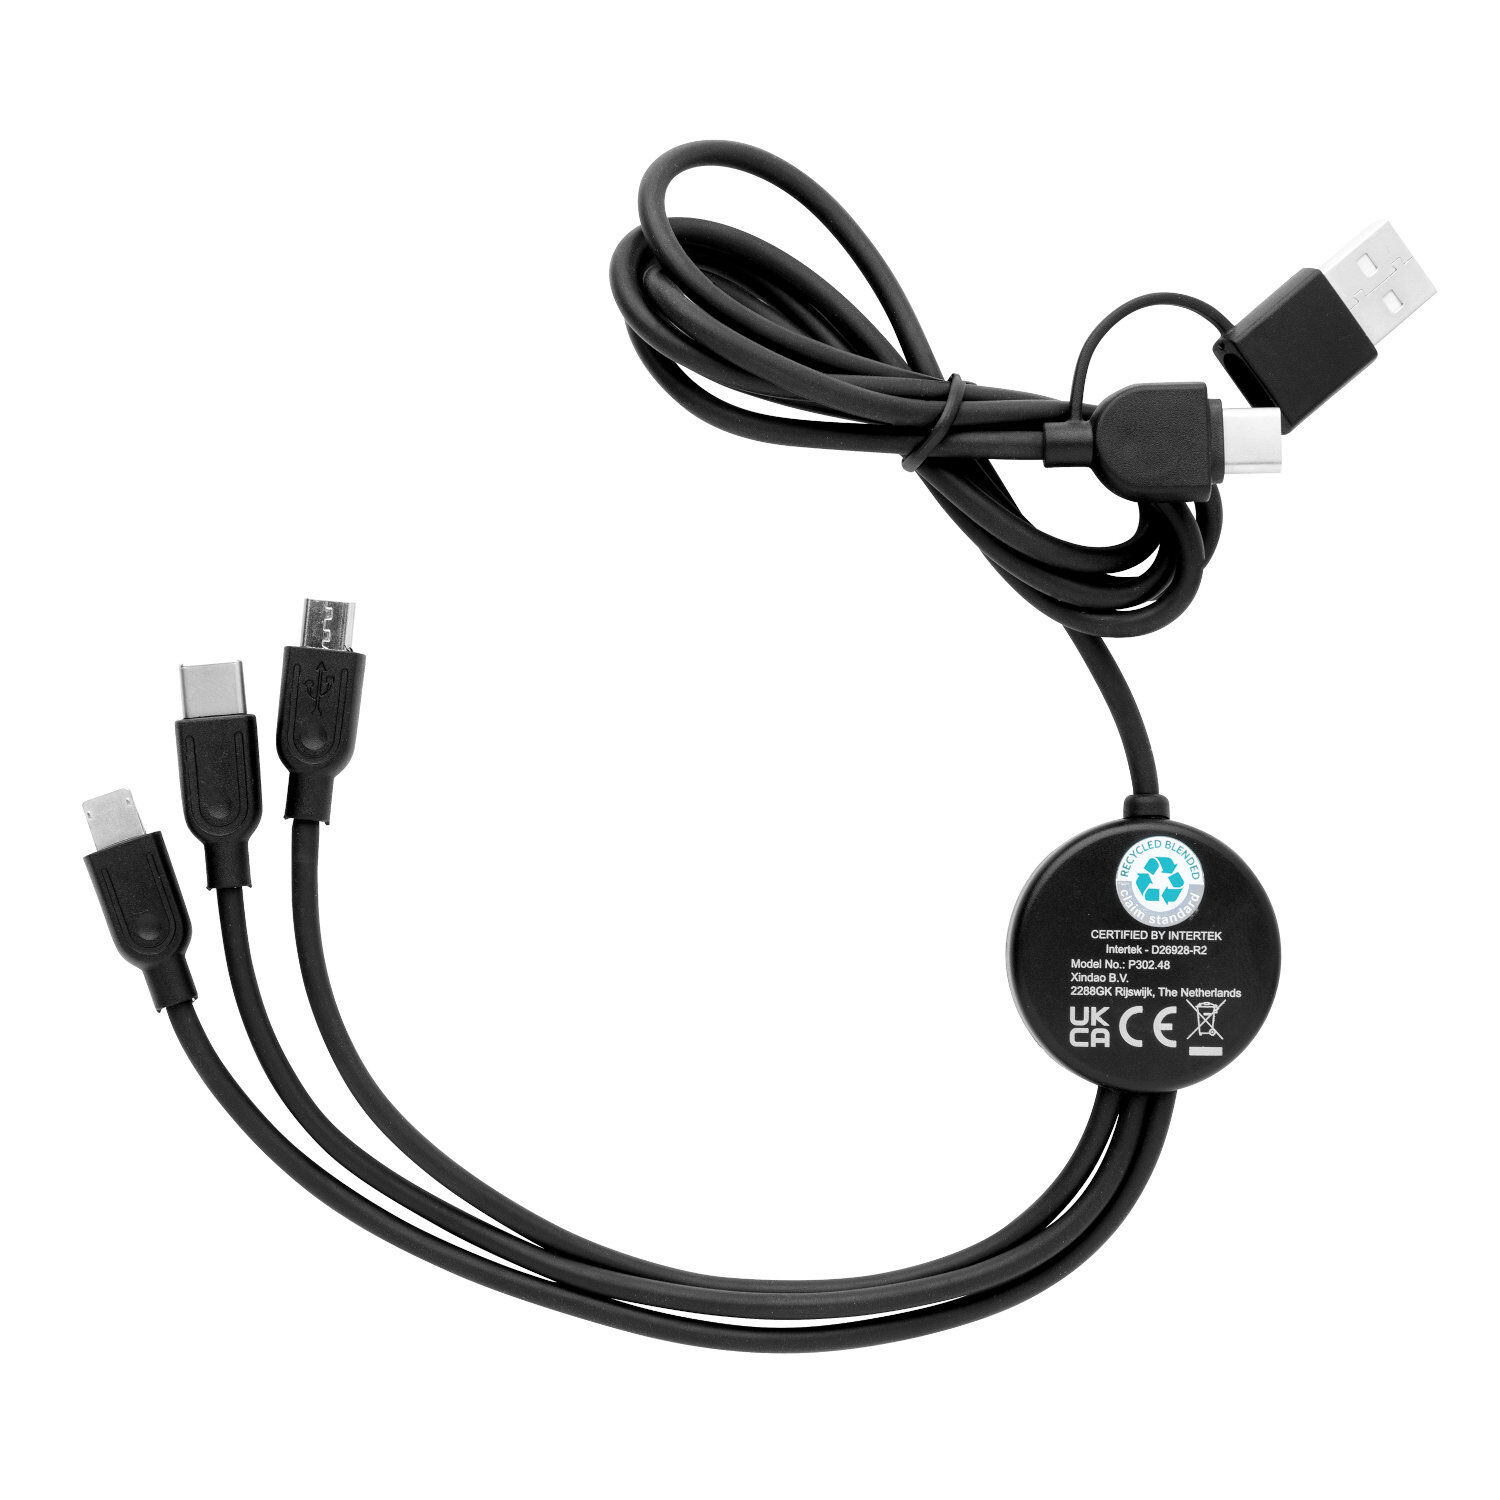 Recycled 6 in 1 USB Charging Cable (reverse view)